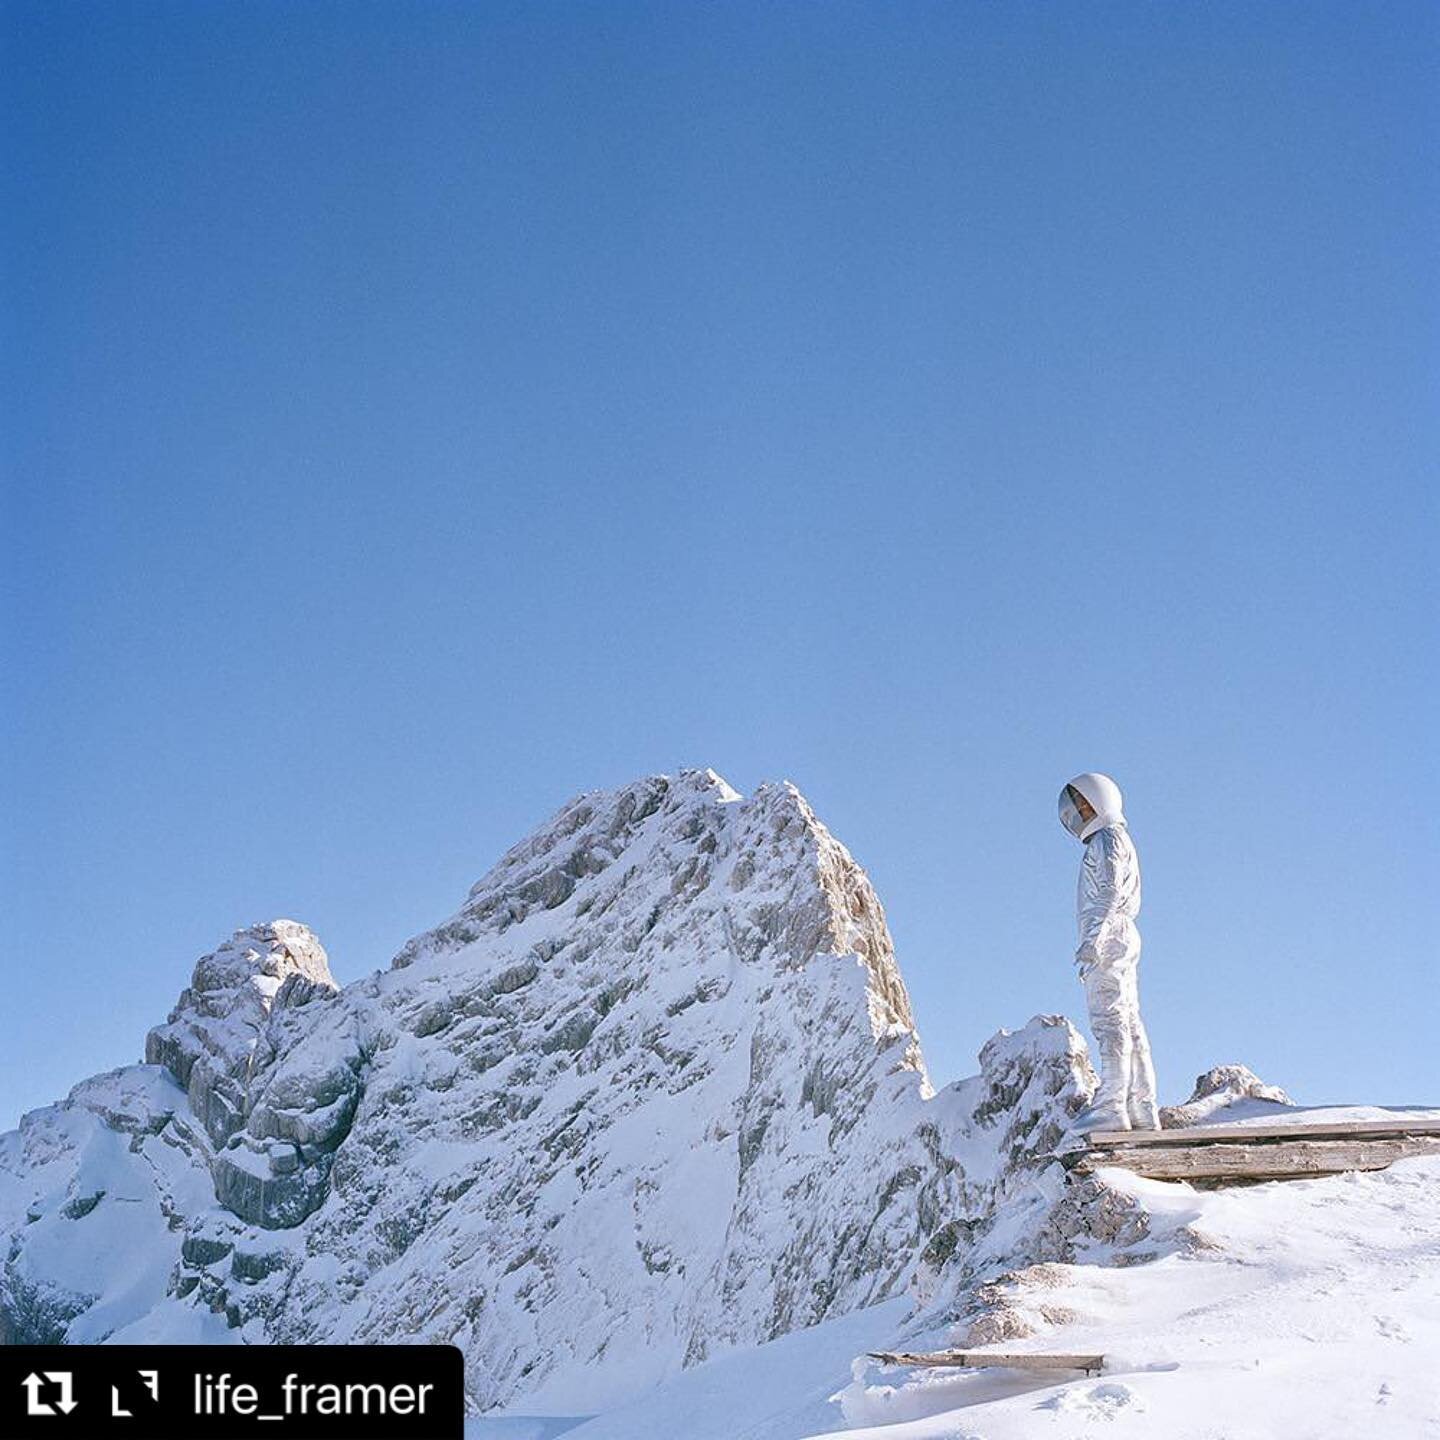 #Repost @life_framer 
・・・
Today&rsquo;s WORLD TRAVELERS inspirational photography comes from german photographer Sascha Kraus (@sascha.kraus) with images from his series All Day Hero.
&bull;
&quot;Searching shelter and community, the All Day Hero is 